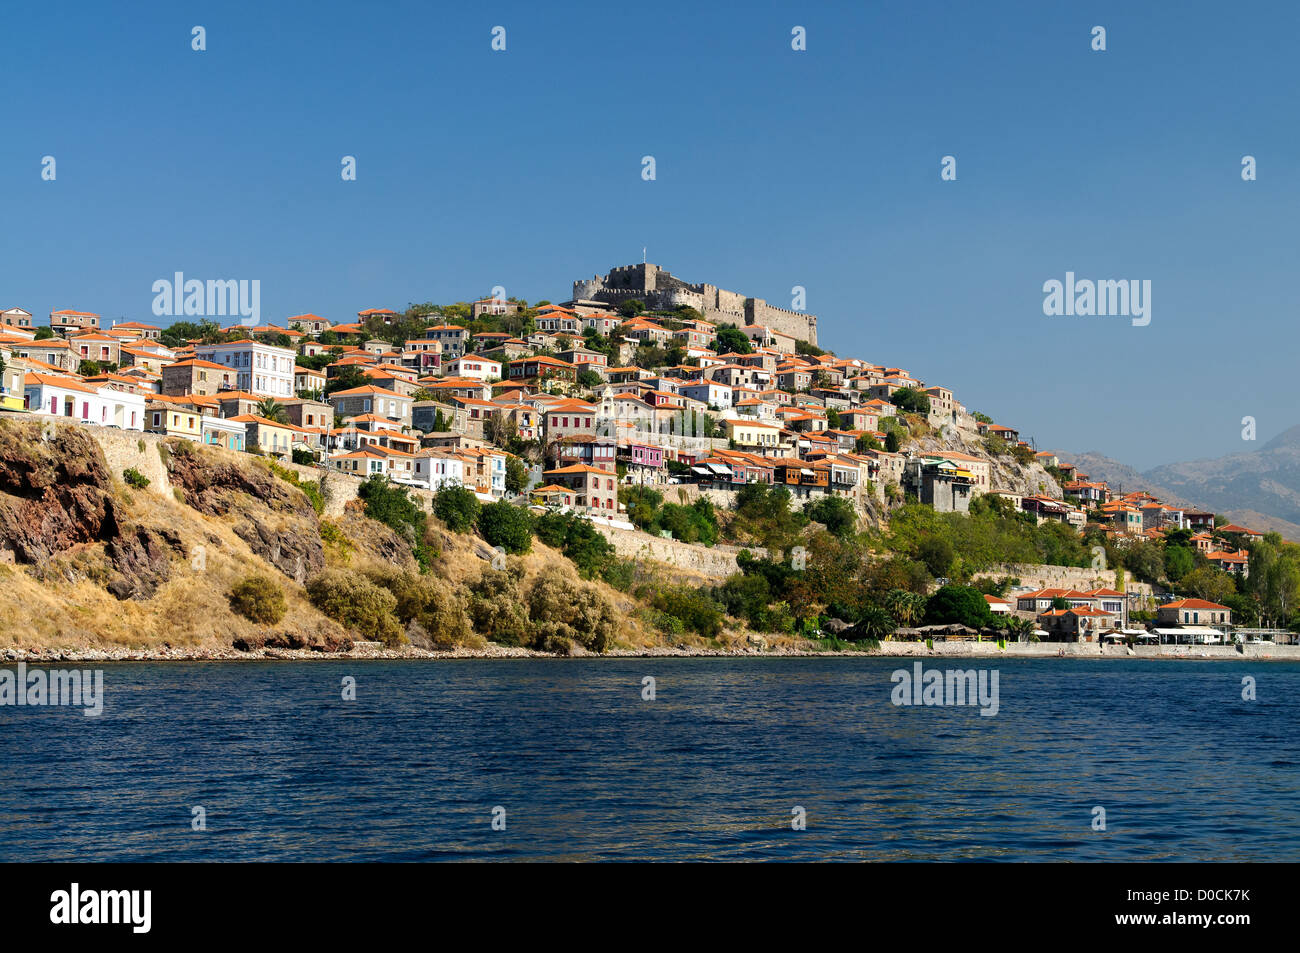 The Greek town of Molyvos on the Island of Lesvos built on a hillside Stock Photo